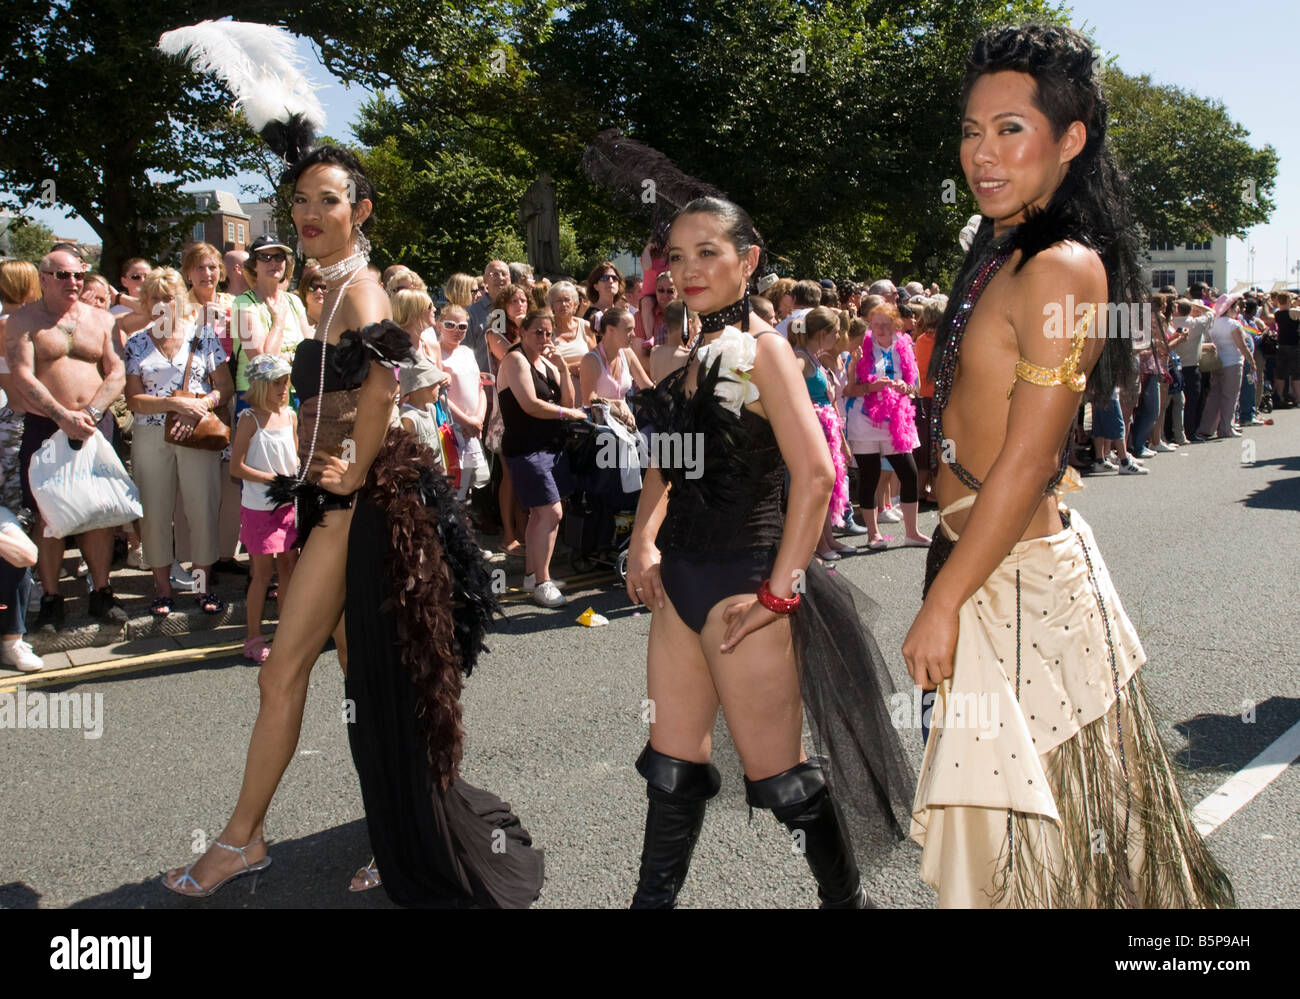 UNITED KINGDOM, ENGLAND, 4th August 2007. The parade passes by during Gay Pride celebrations in Brighton. Stock Photo